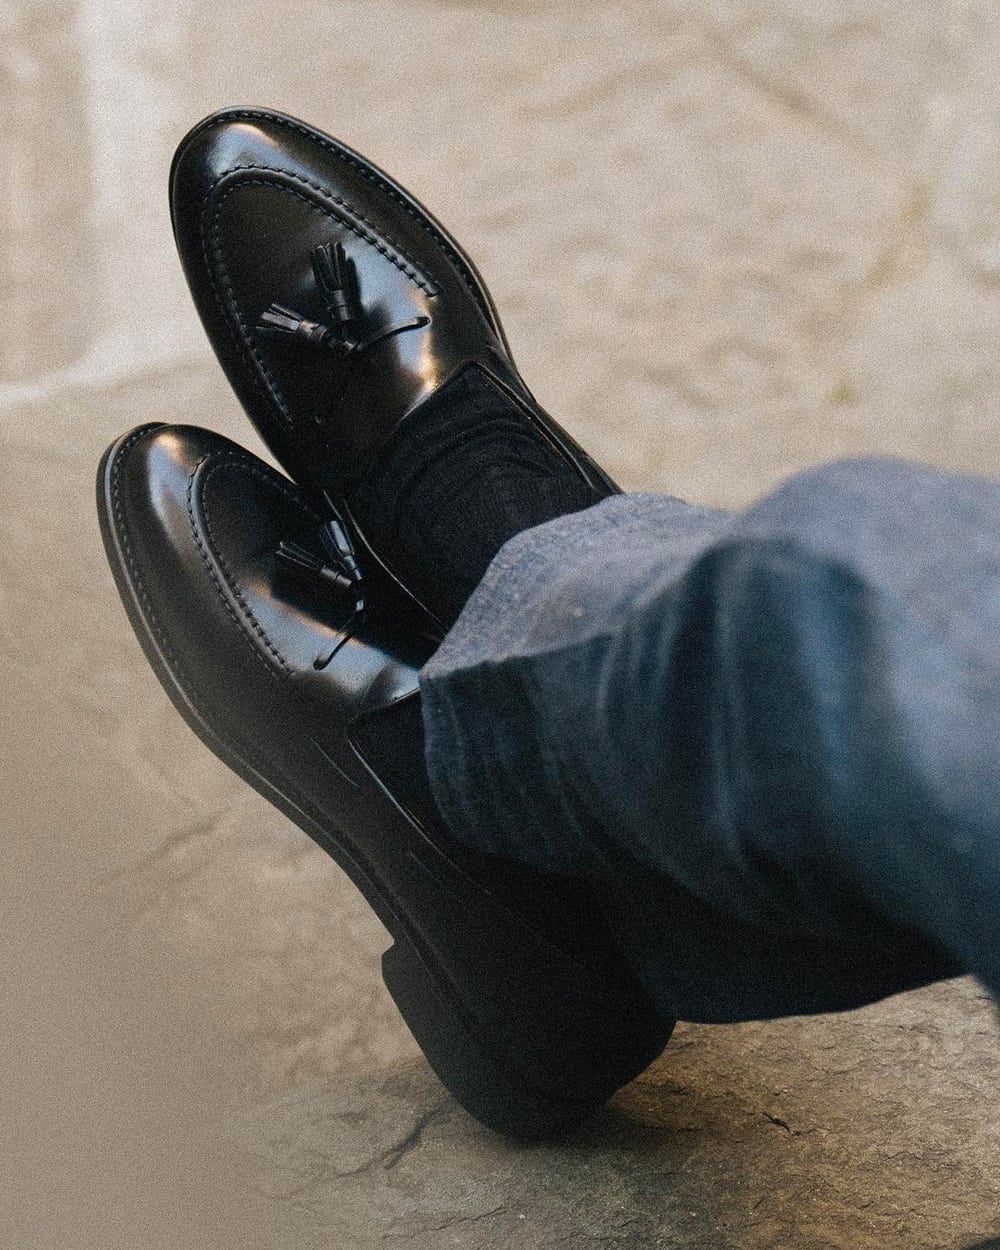 Man wearing a pair of high end black leather tassel loafers by Velasca with black socks and grey wool pants